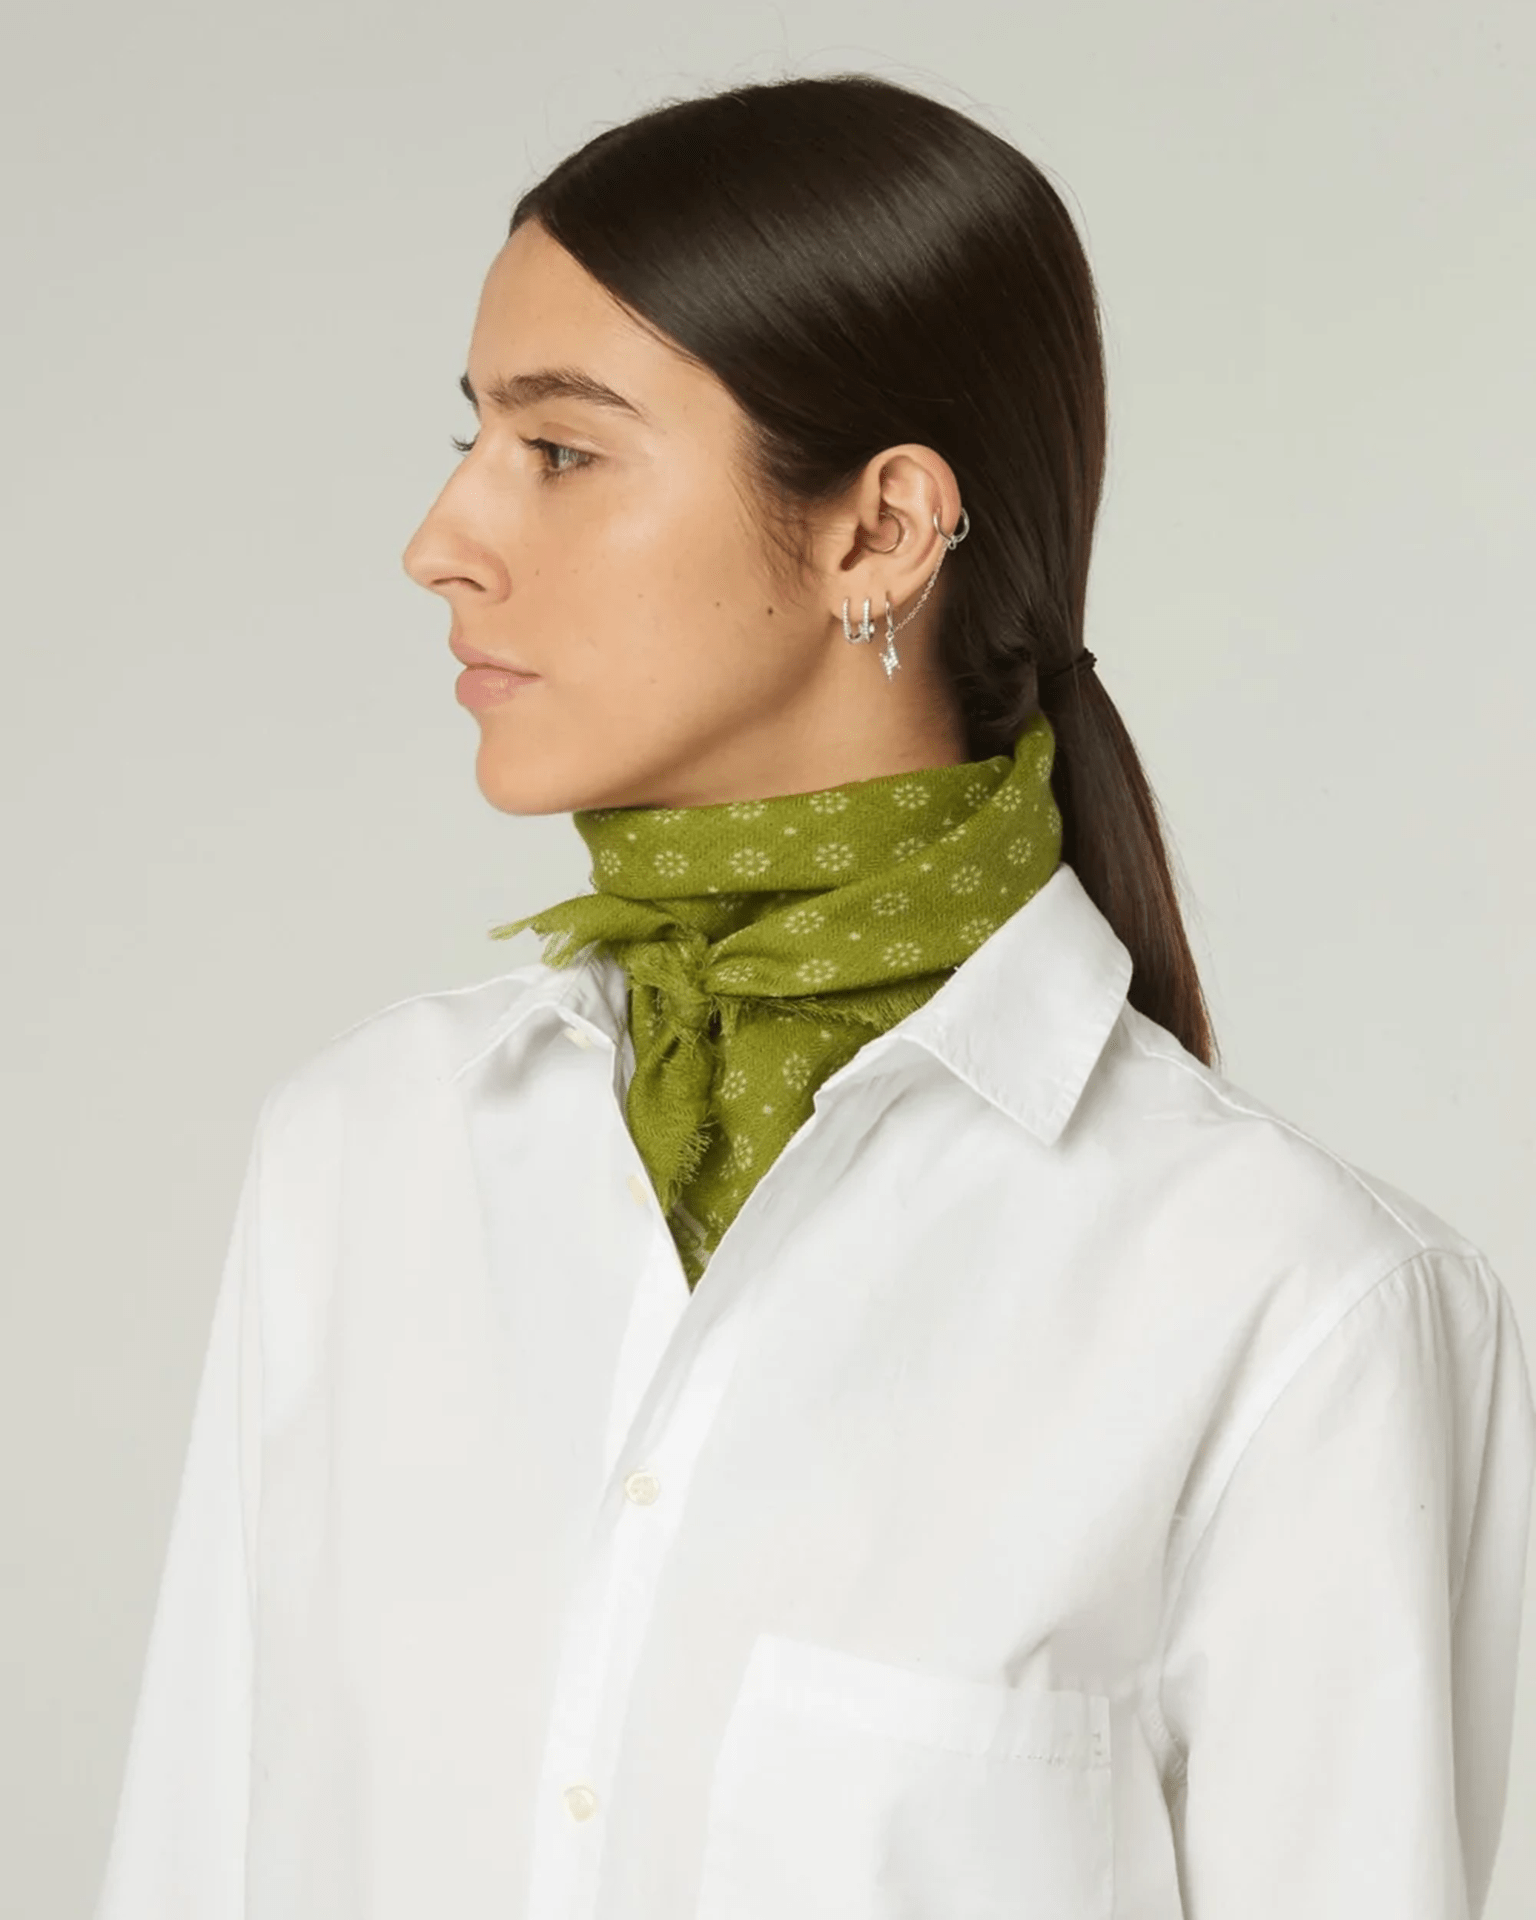 Mois Mont No 608 Wool Bandana in Pollen - Bliss Boutiques